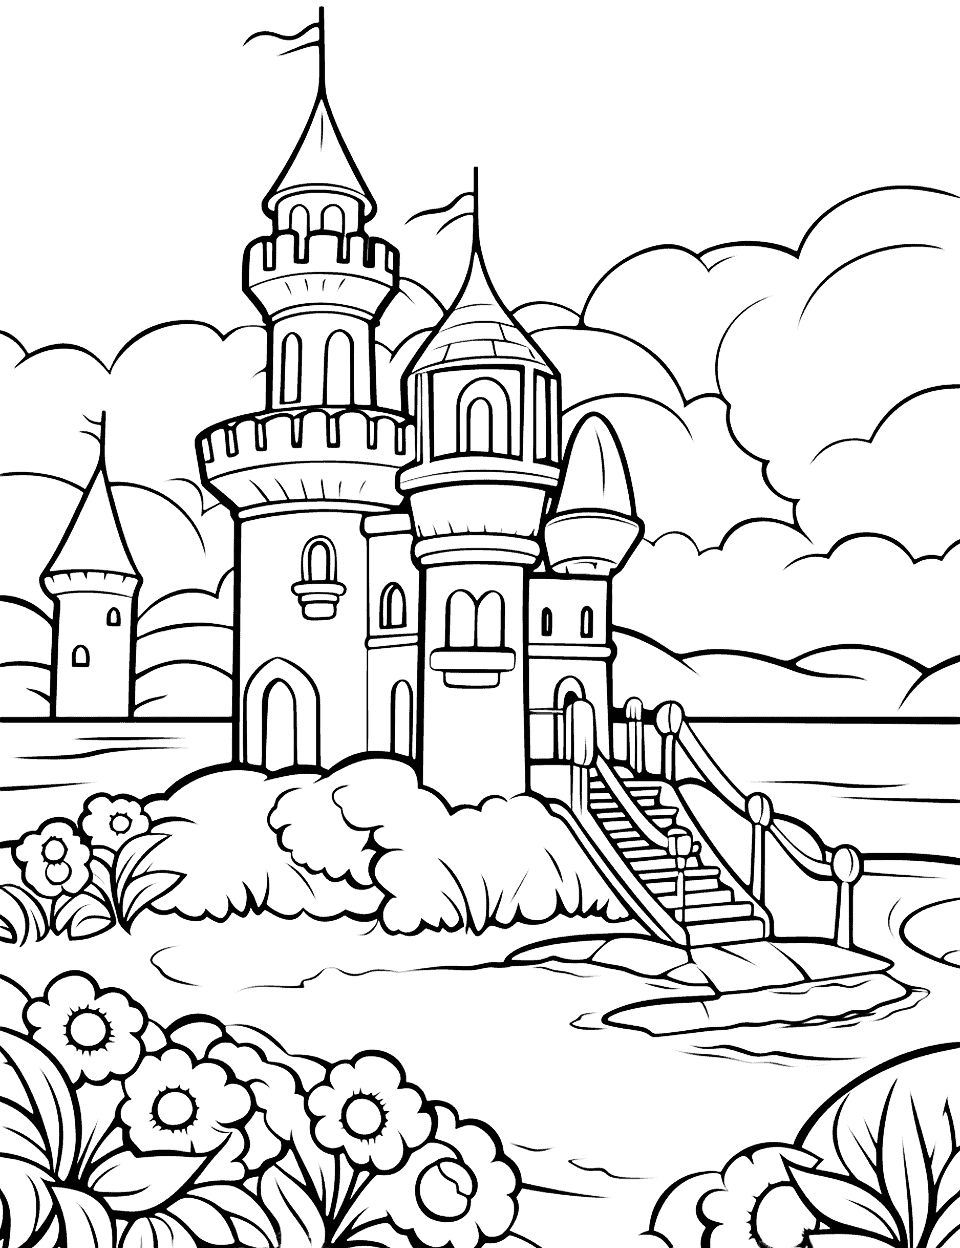 Fairytale Castle on a Summer Day Coloring Page - A majestic fairytale castle with blooming gardens, a flowing river, and a clear blue sky.